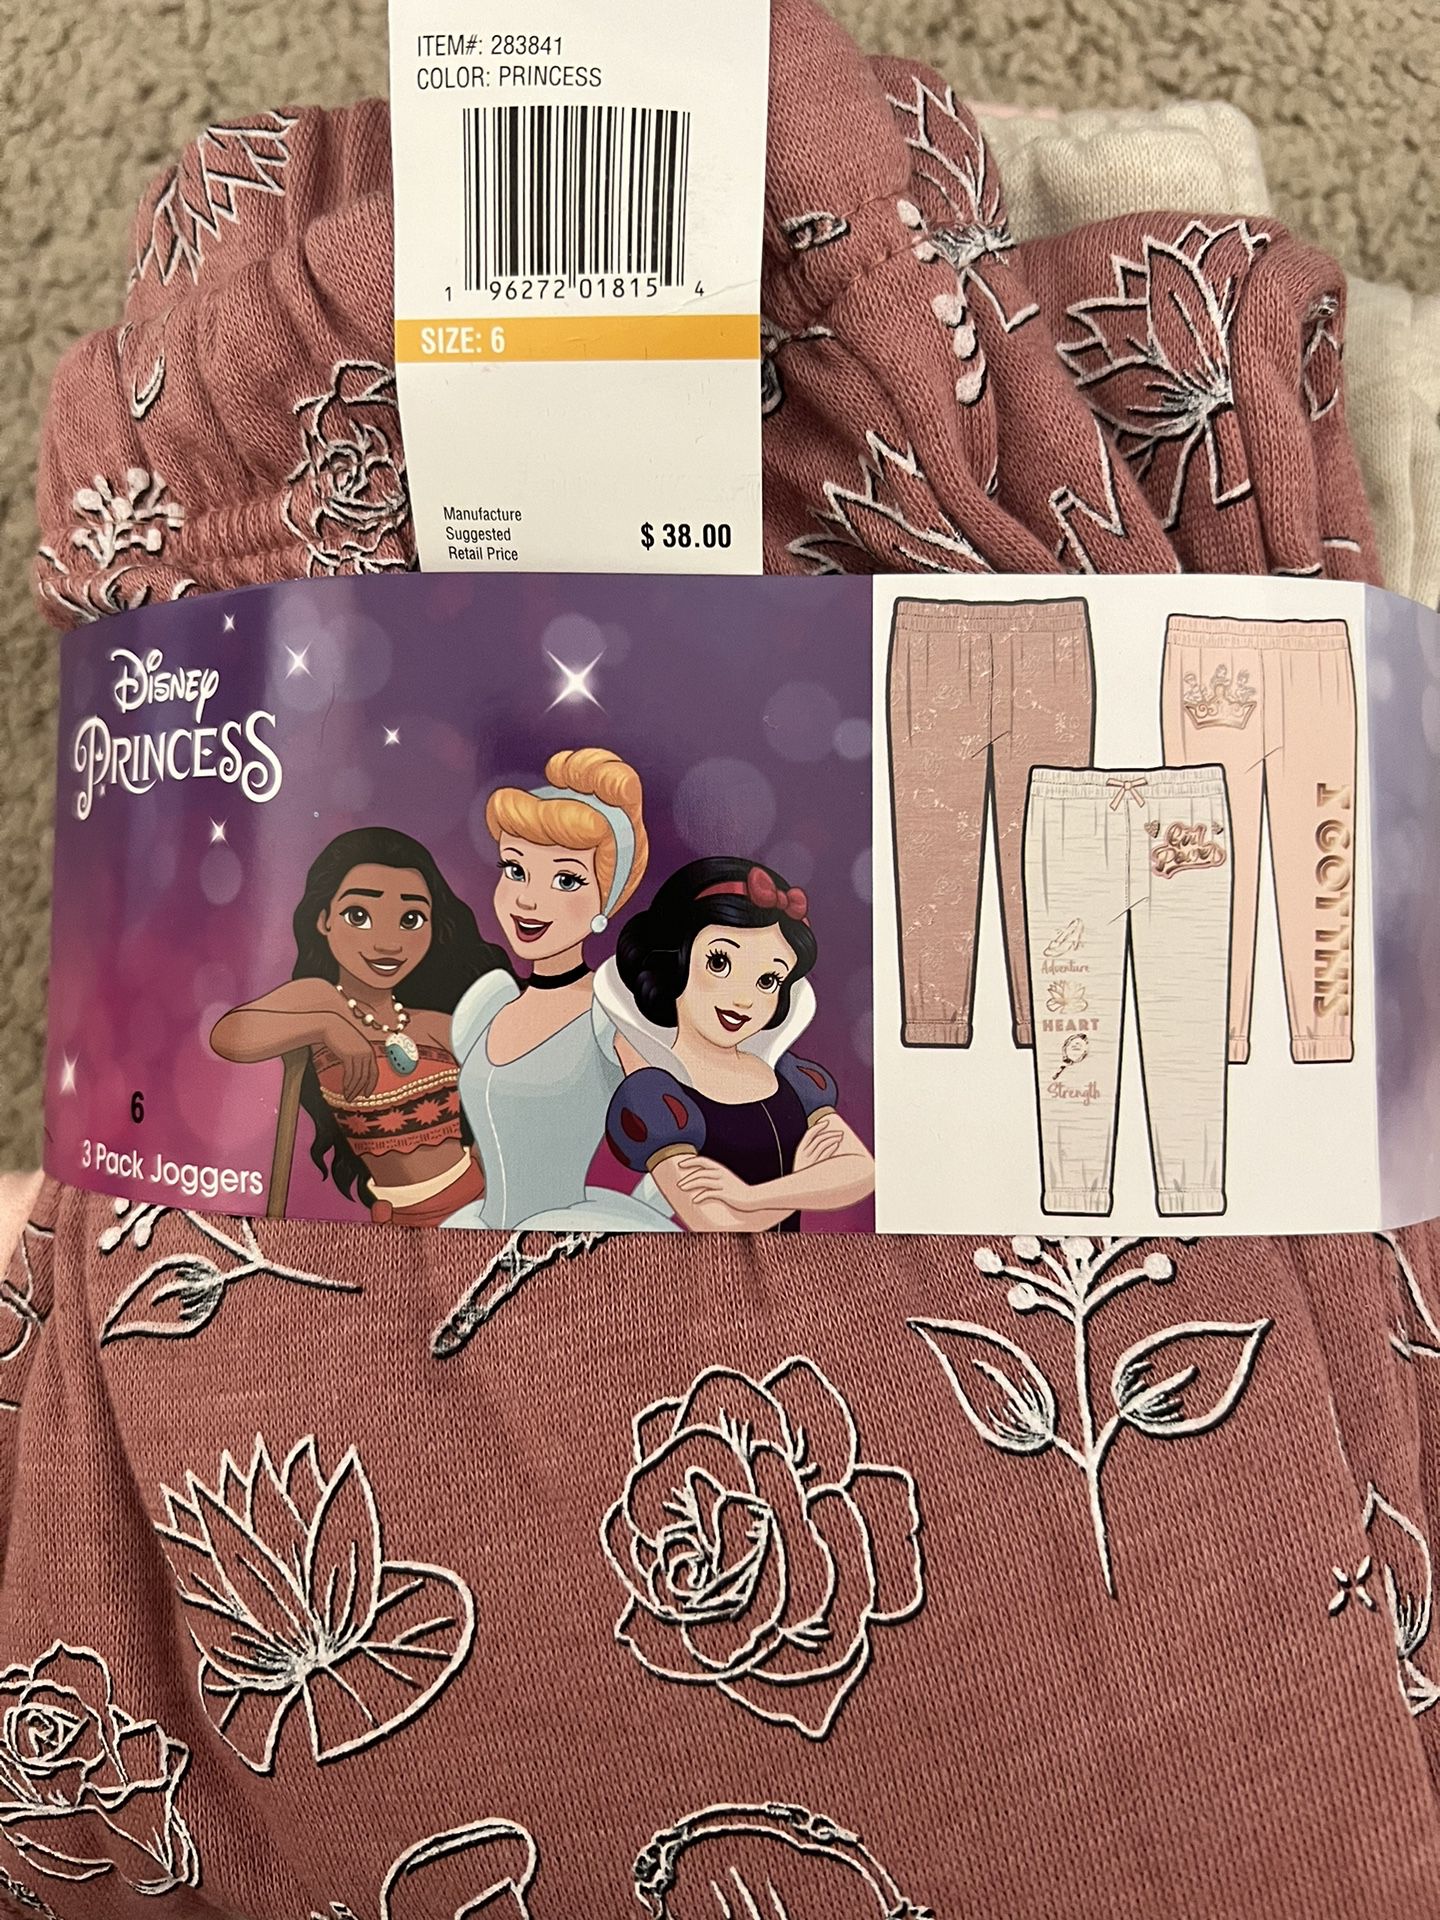 DISNEY PRINCESS 3 pack joggers size 3T and 6